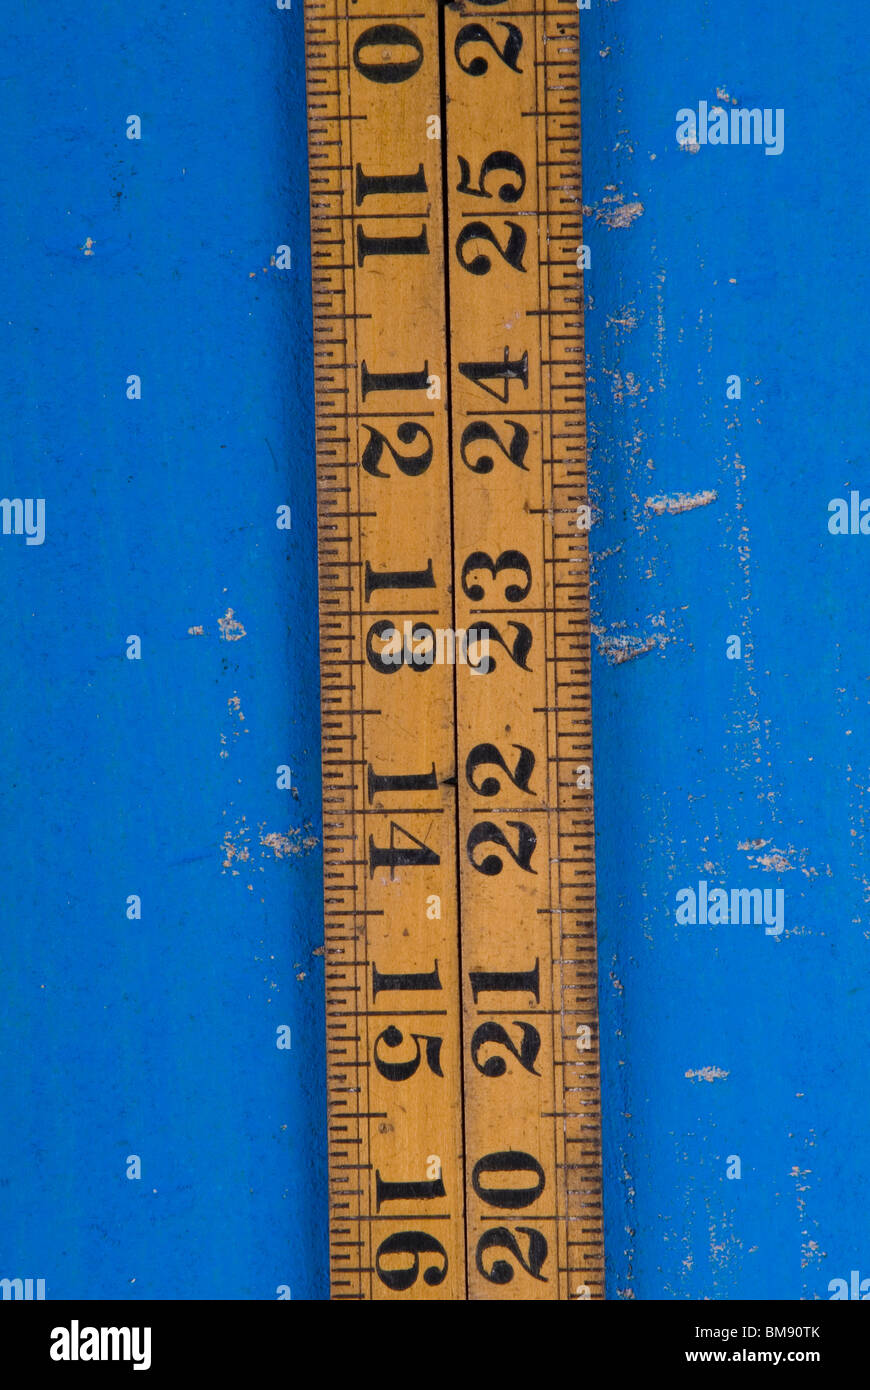 Old fashioned wooden ruler Stock Photo